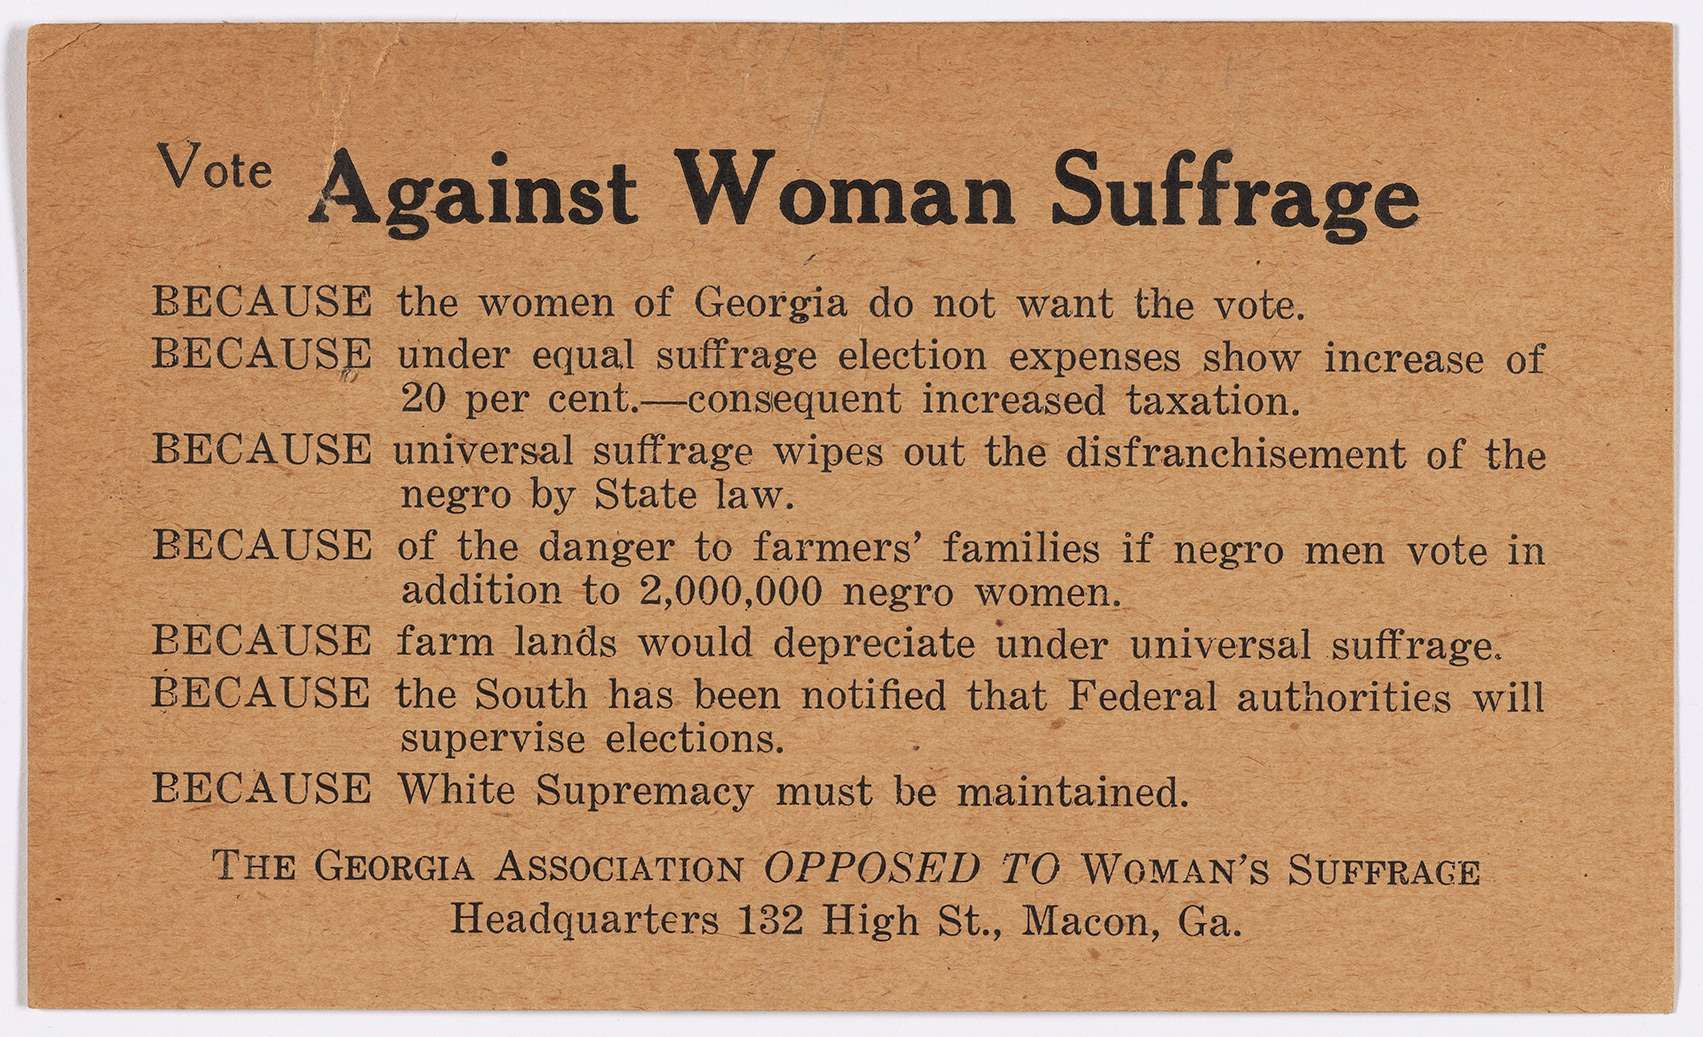 Vote_Against_Woman_Suffrage_-_Georgia_Association_Opposed_to_Woman_Suffrage,_c._1915.jpg